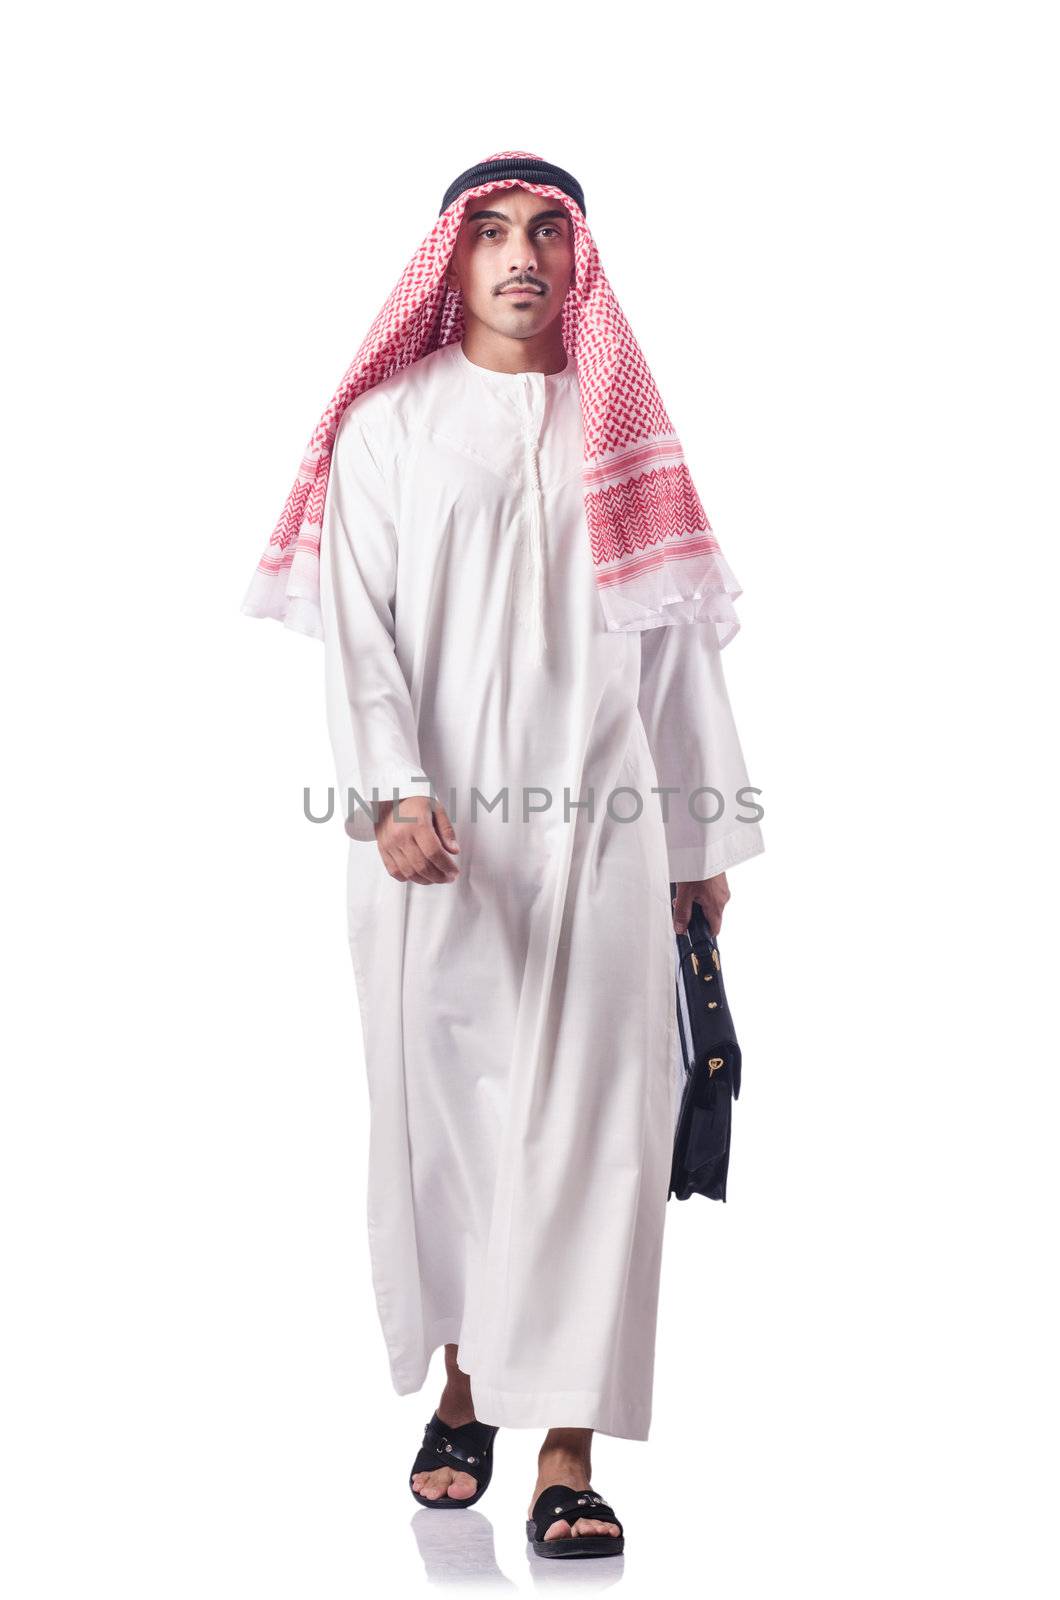 Diversity concept with arab on white by Elnur